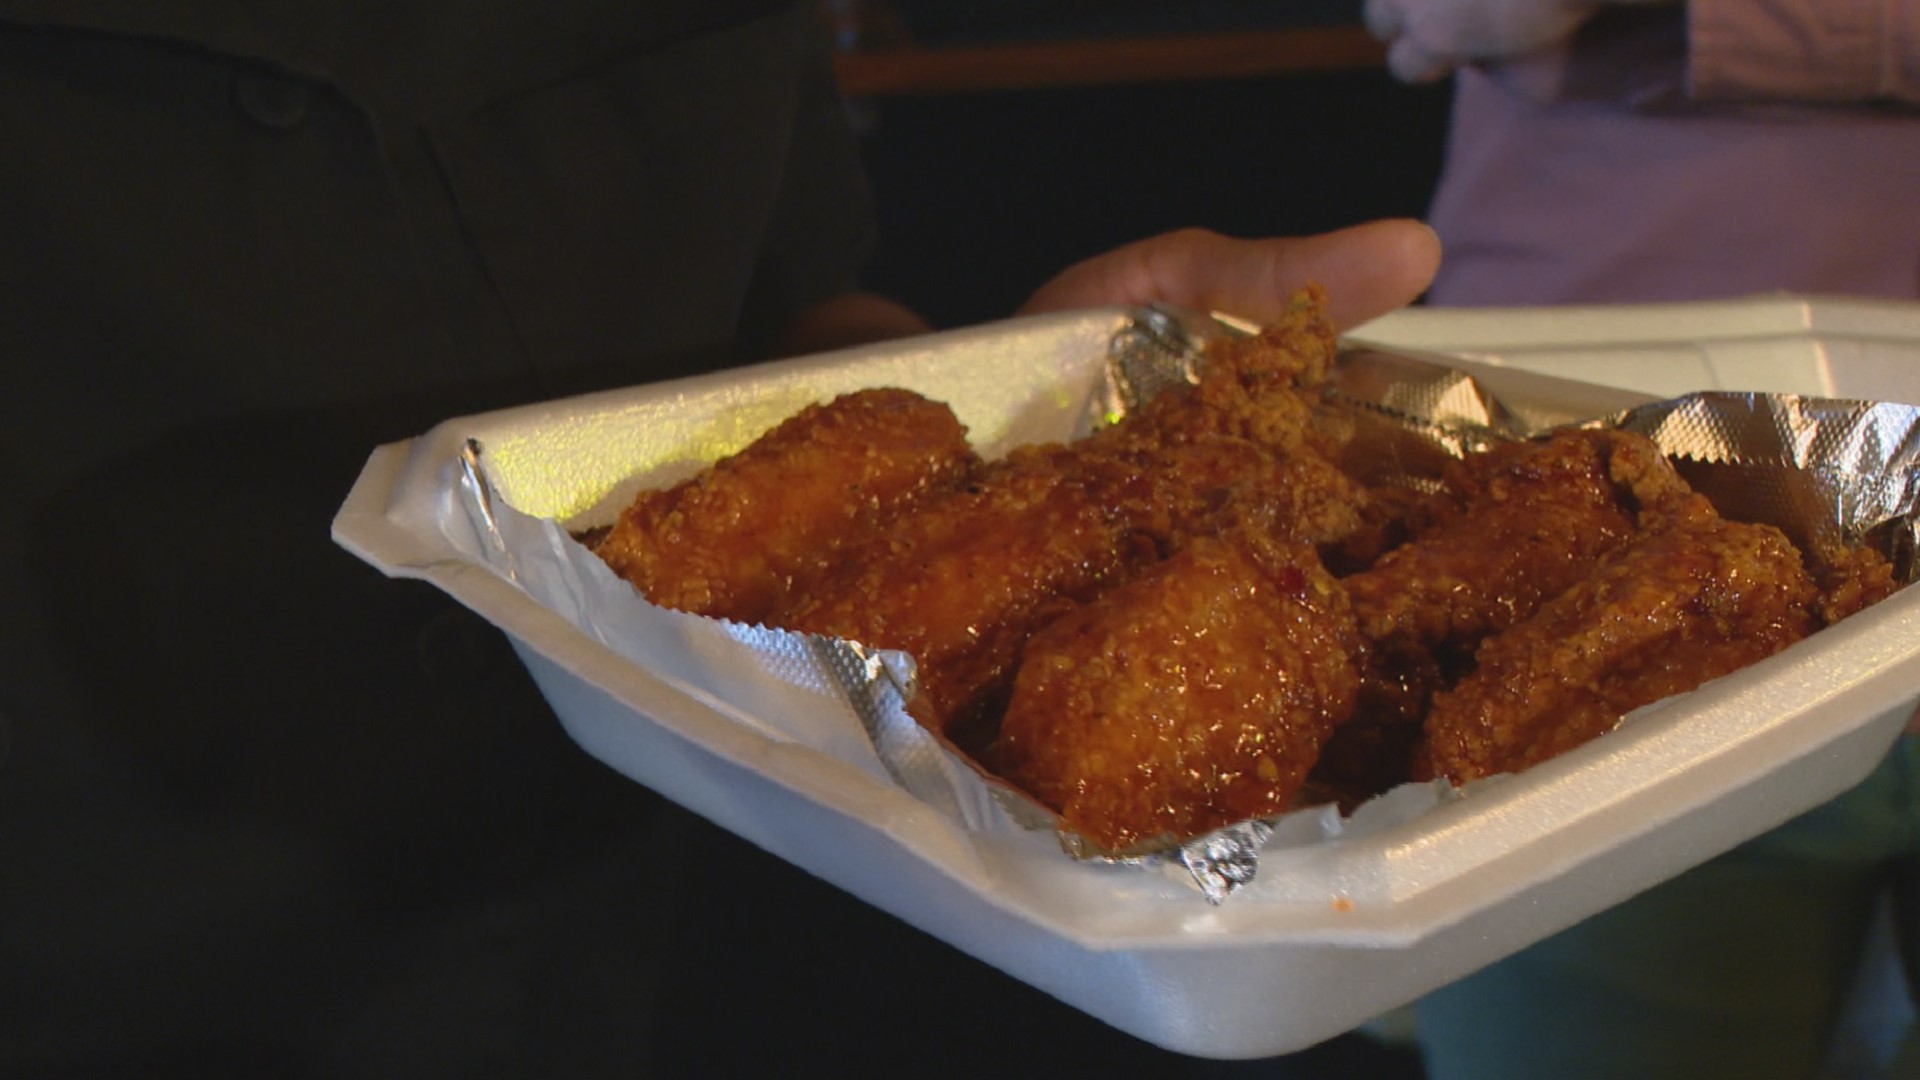 The festival will include DJs, a wing eating contest and guests can vote for who they think has the best chicken in Indy.